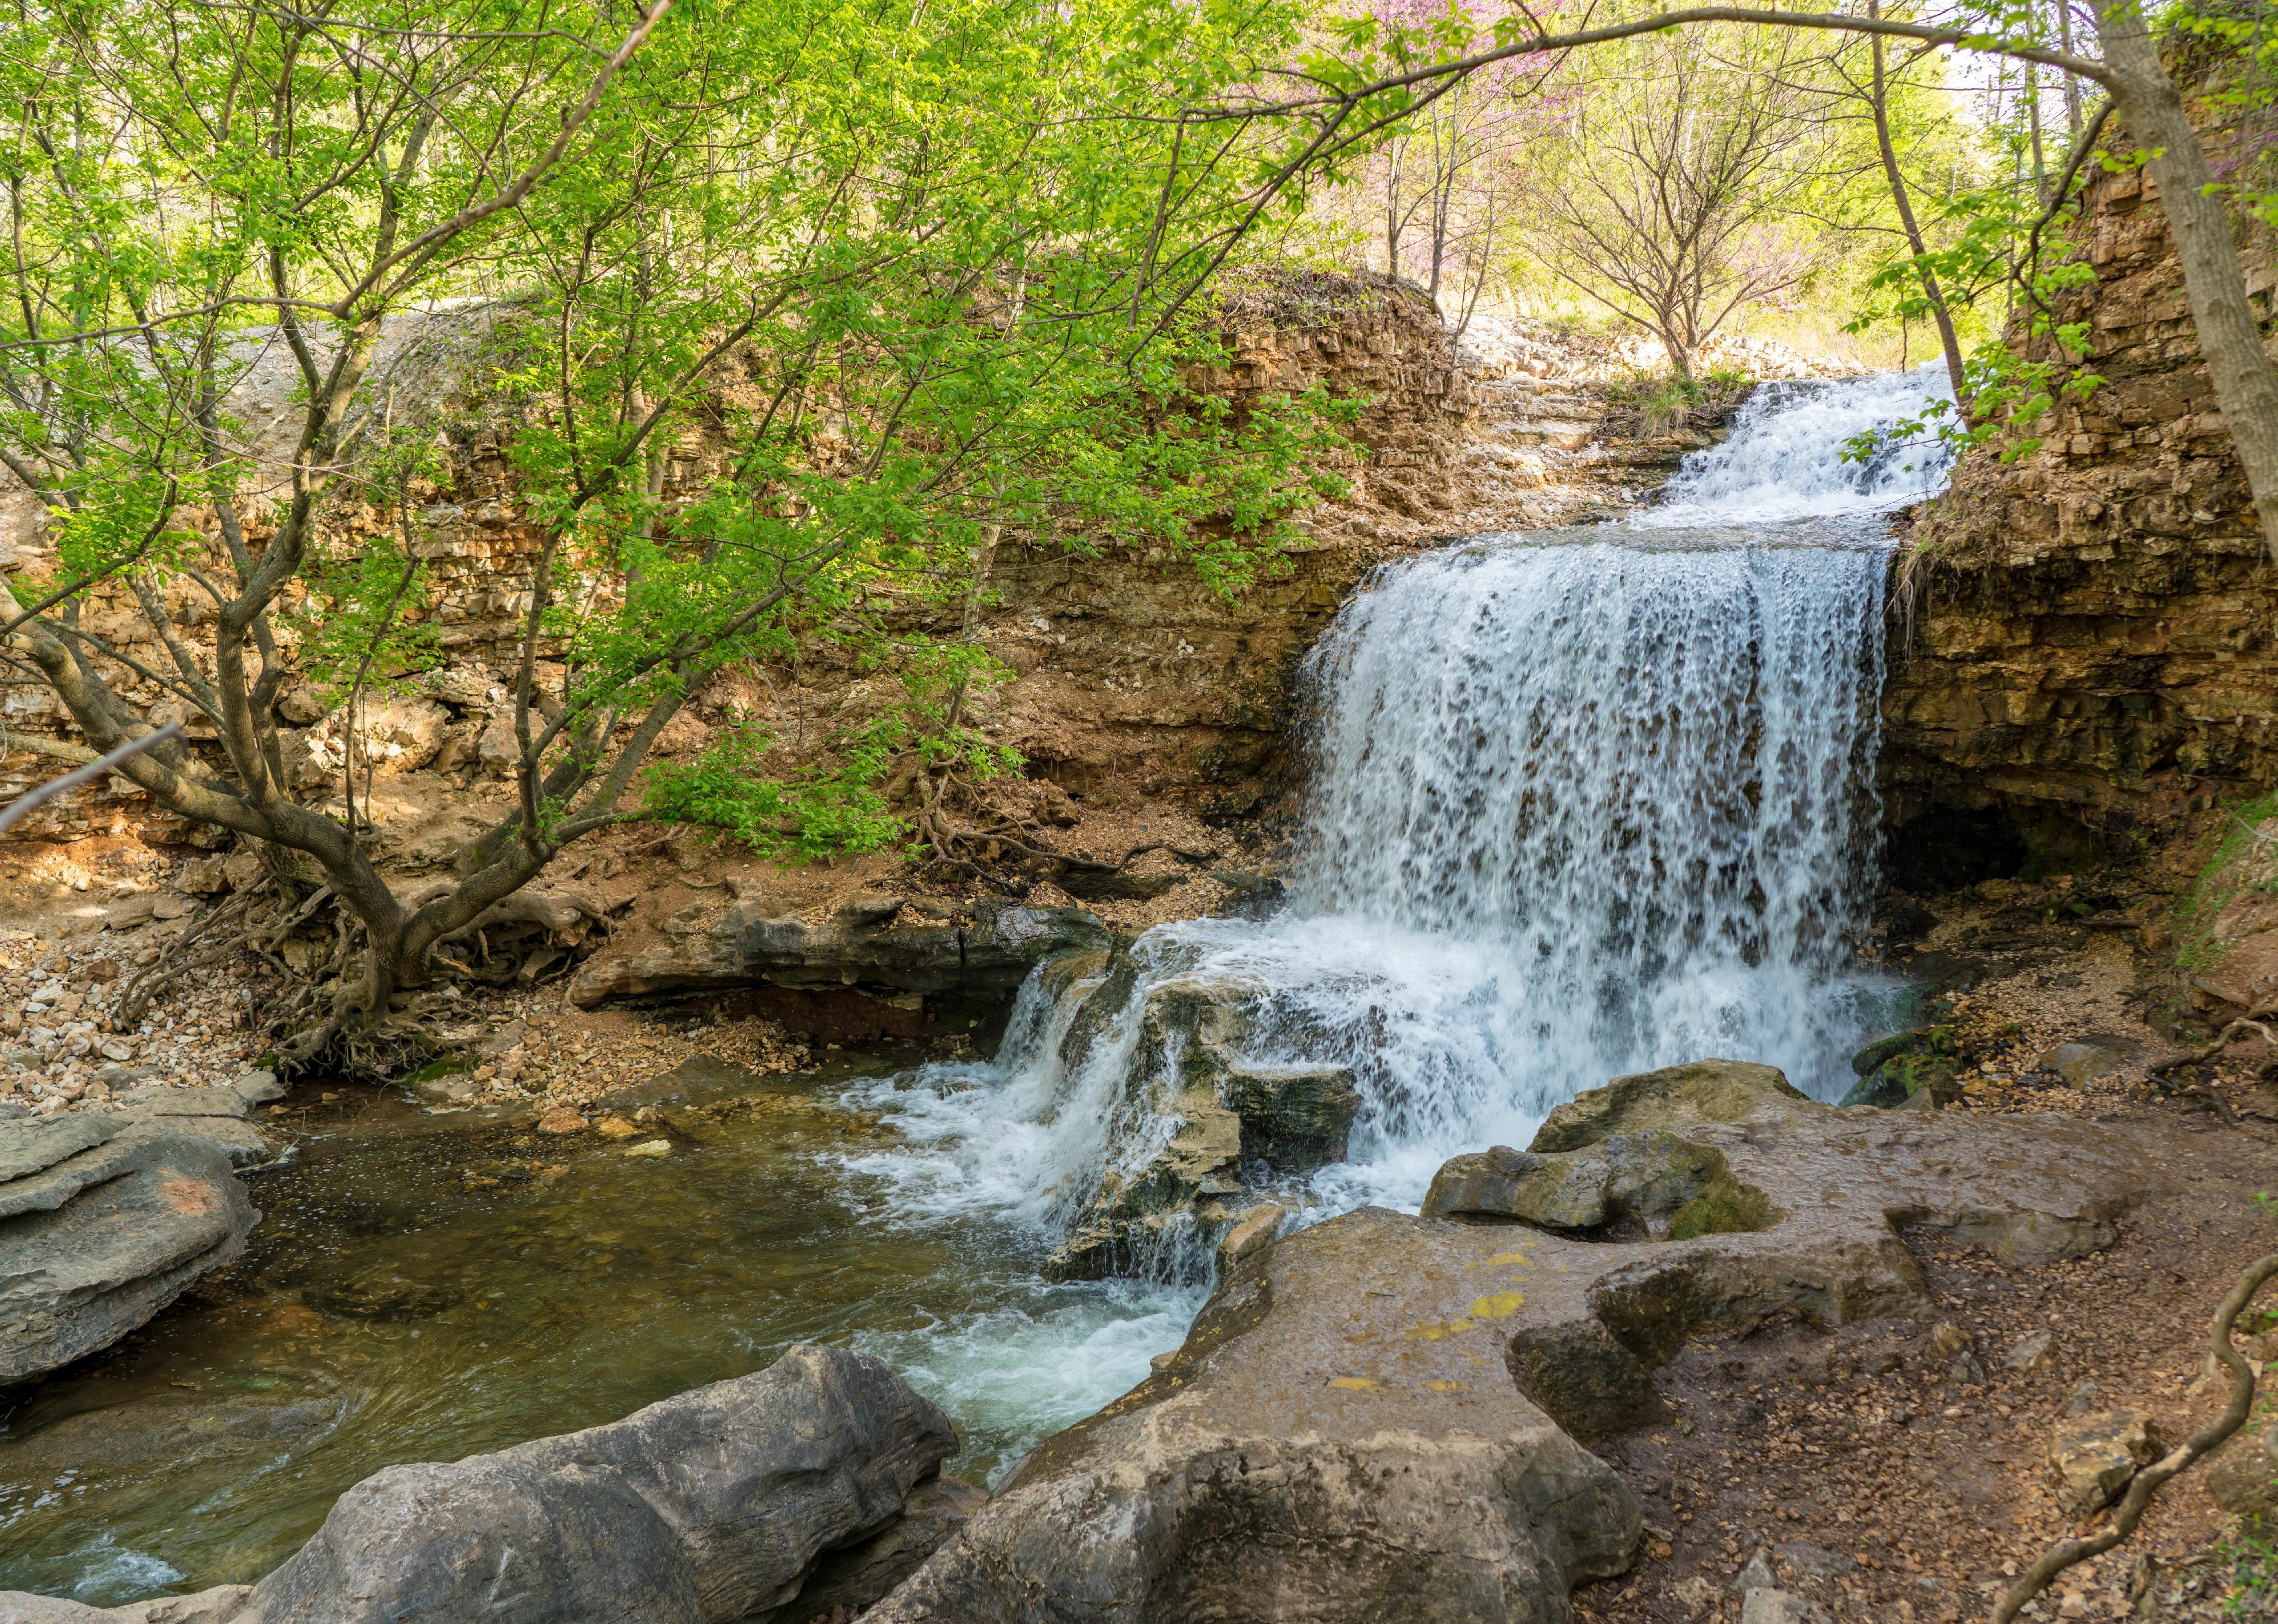 Waterfall in wood area in spring.